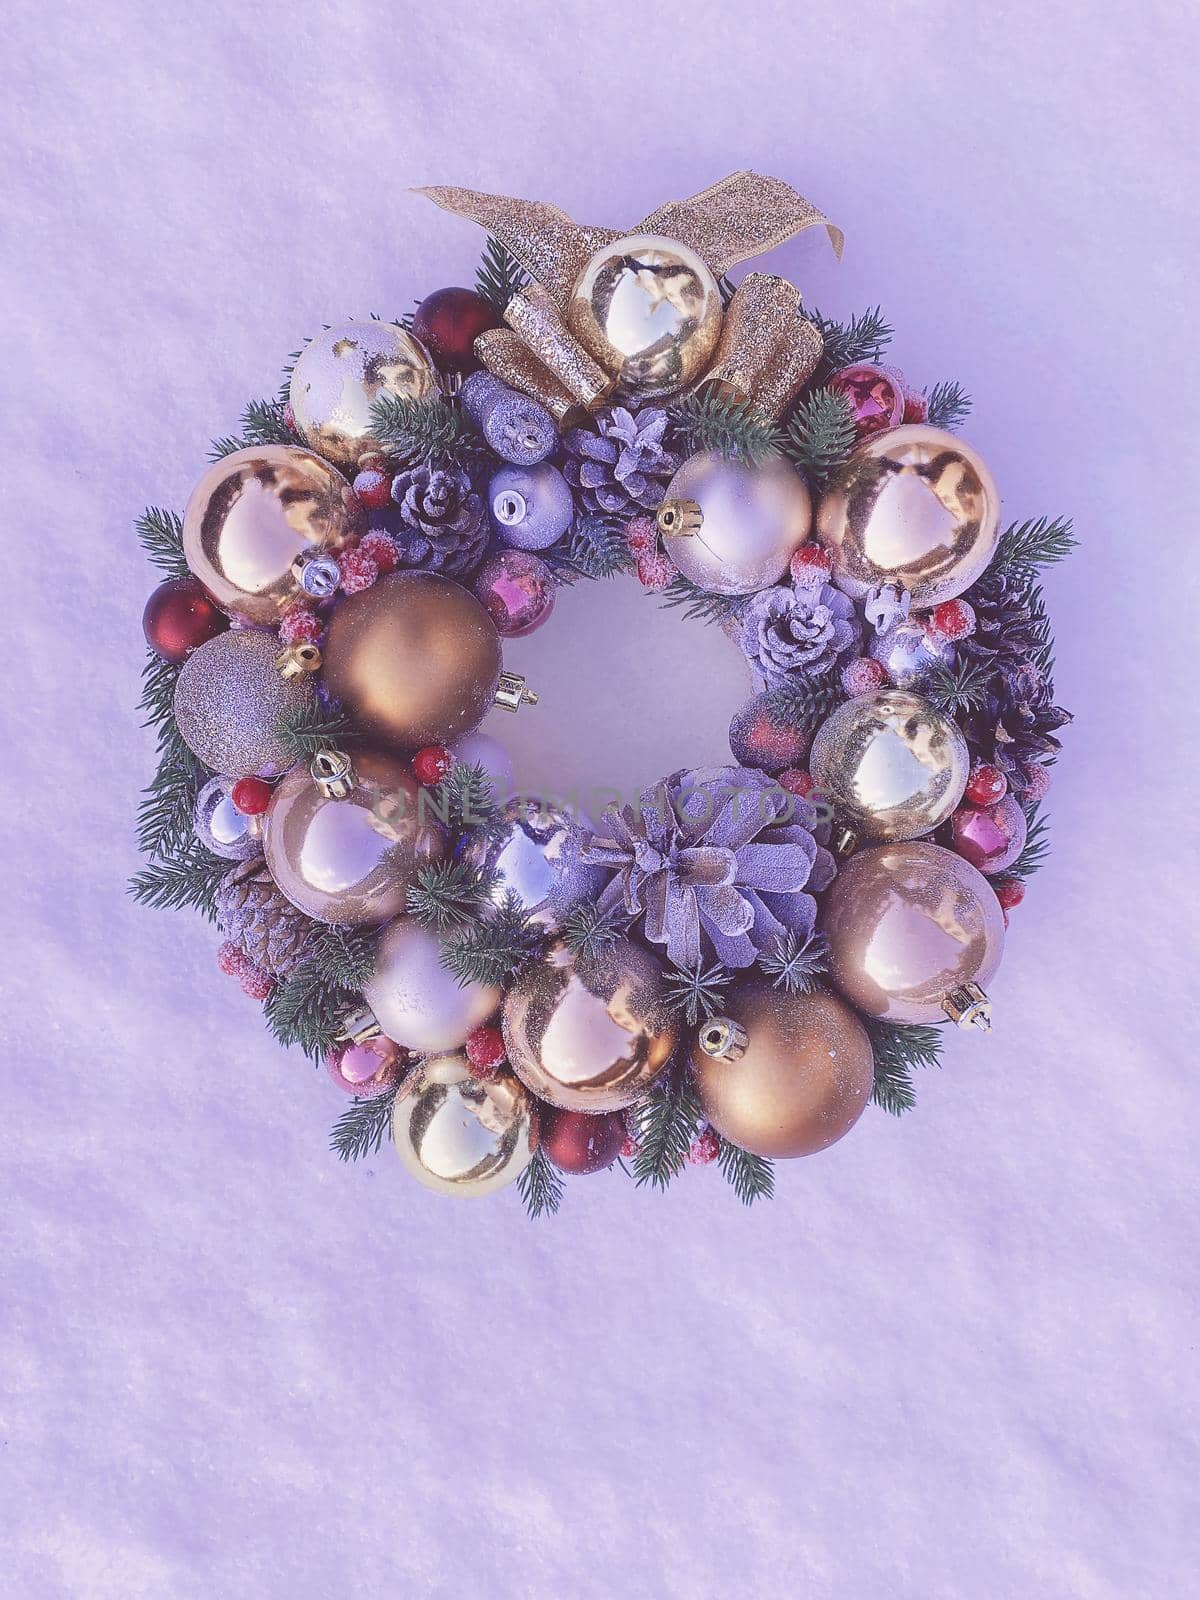 Christmas decorative wreath with pine cones, Christmas tree golden balls and ornaments on a textured background. Toned image in color Very Peri by Proxima13